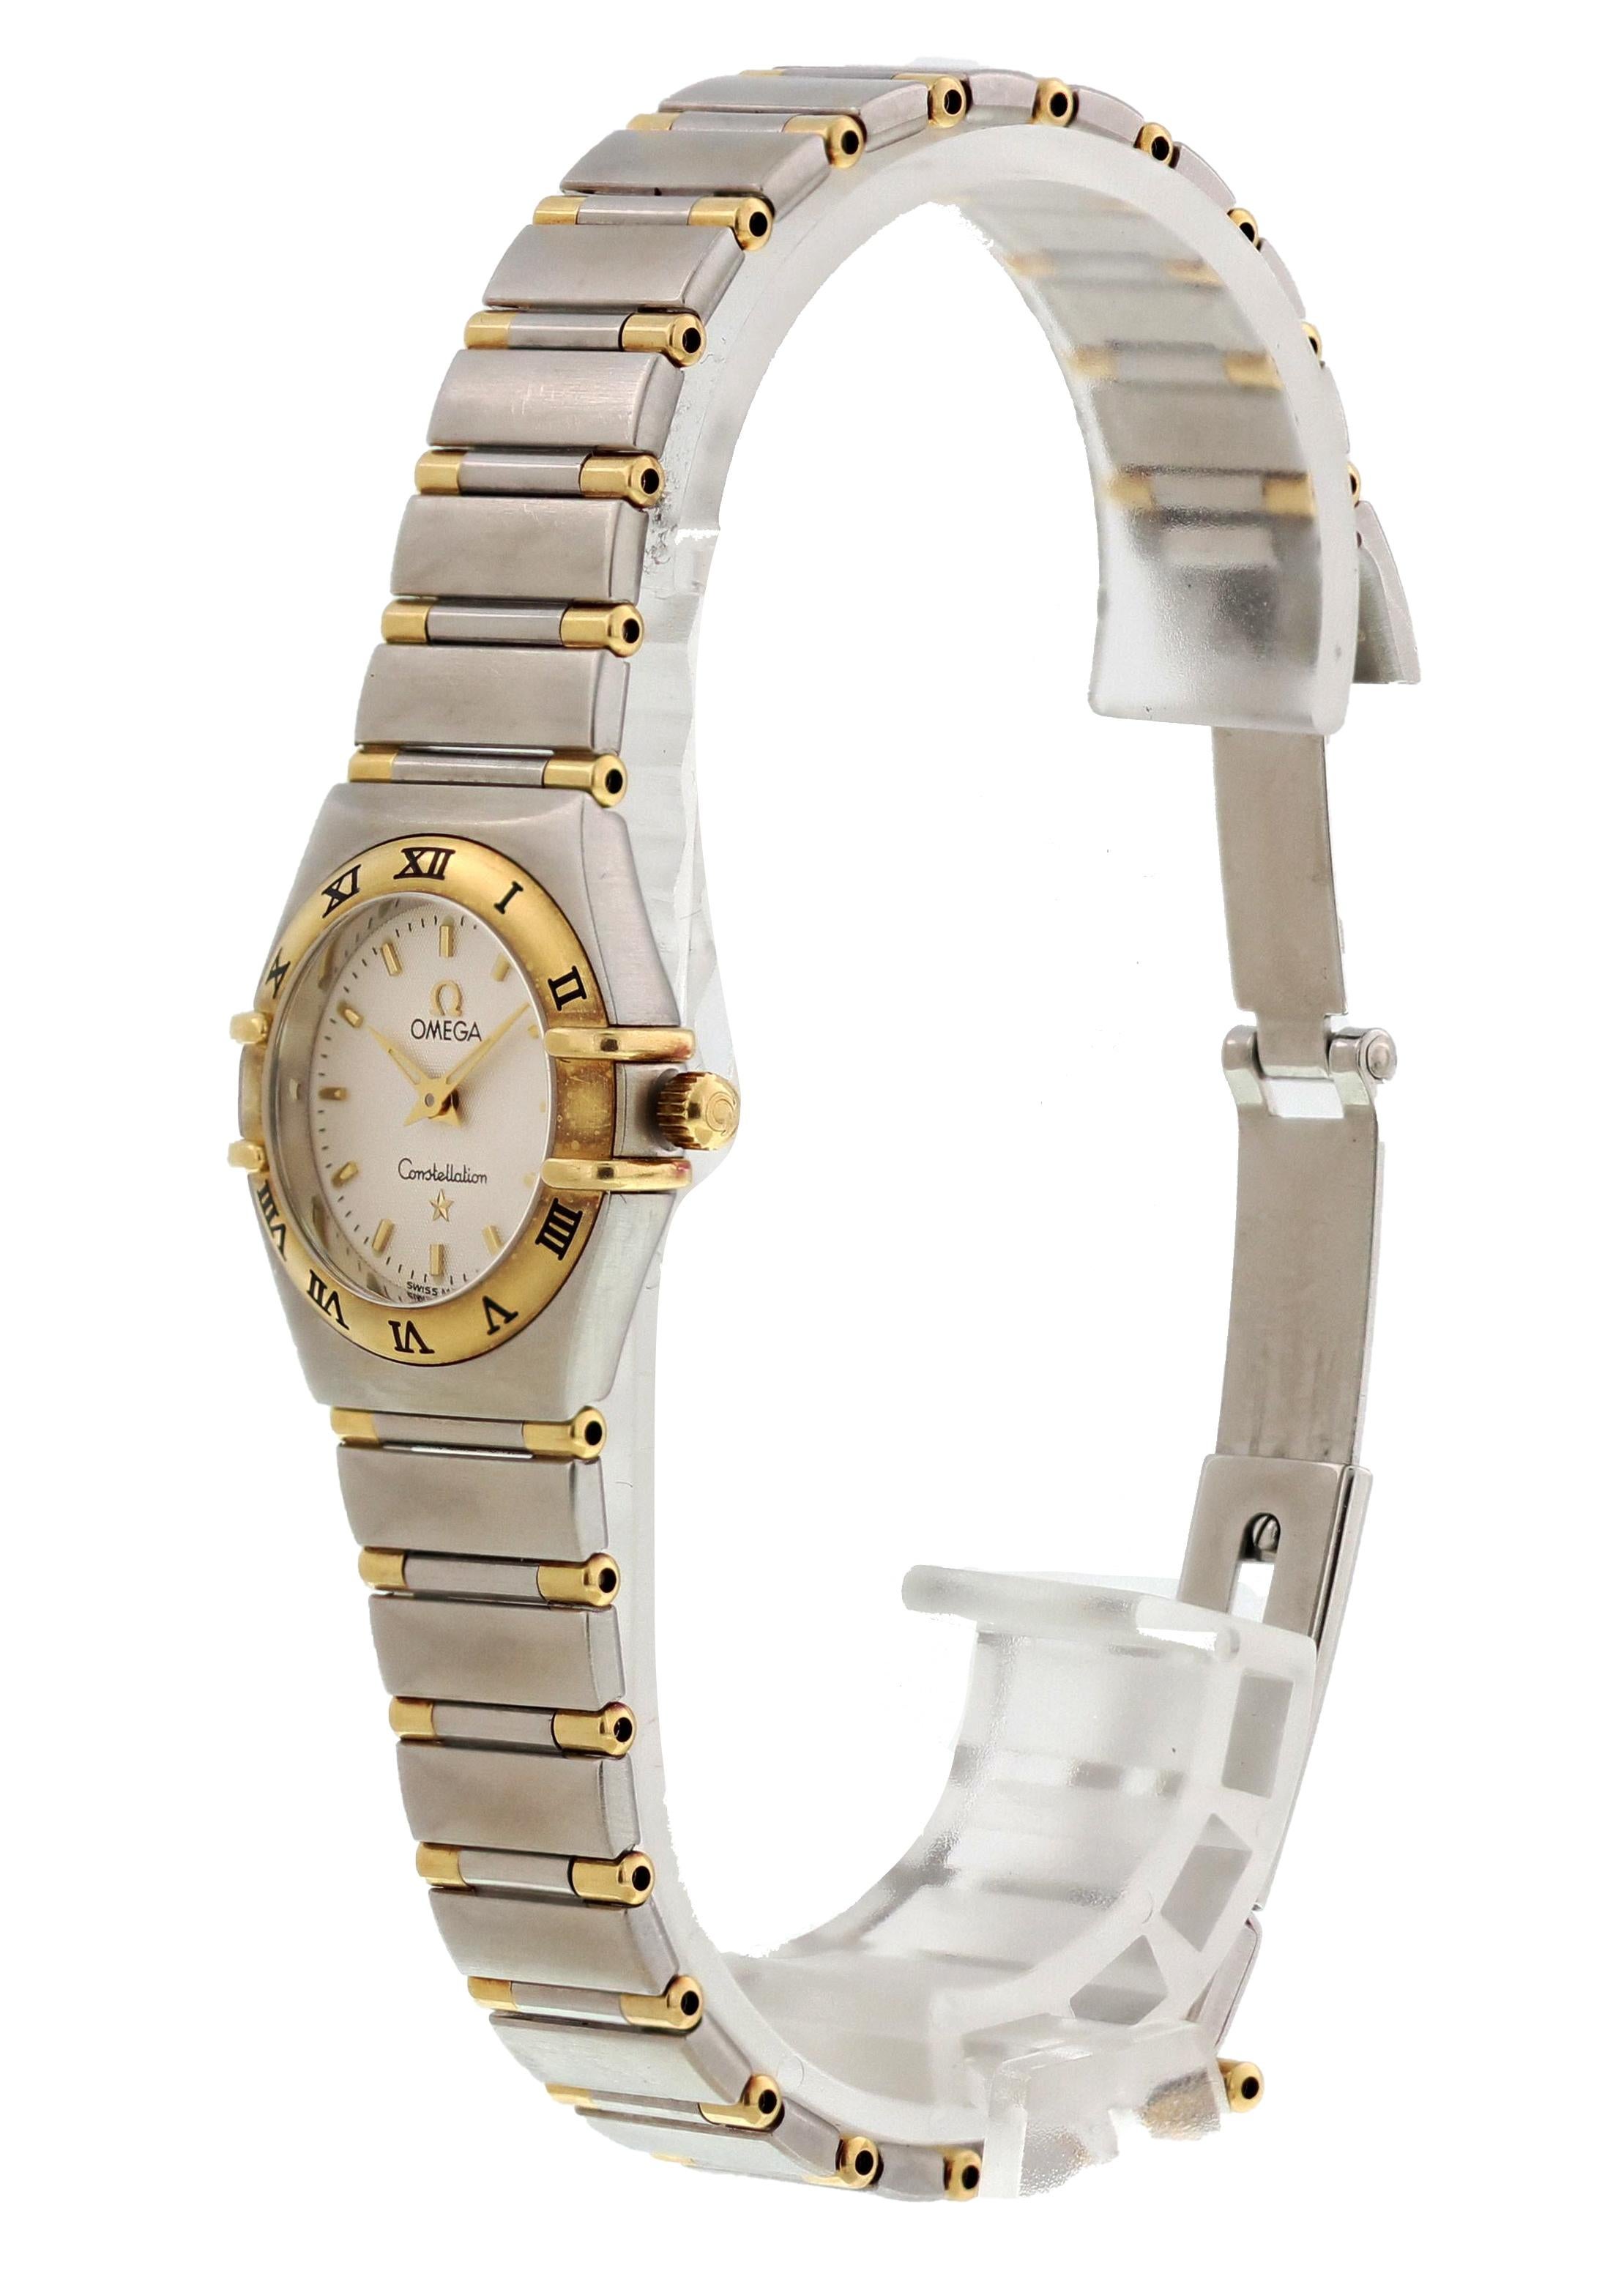 Omega Constellation MOP Ladies Watch. 22mm Stainless steel case. 18kt yellow gold fixed bezel with engraved Roman numerals. White Dial with gold-tone hands and index hour markers. Stainless steel and 18kt yellow gold bracelet with butterfly clasp.